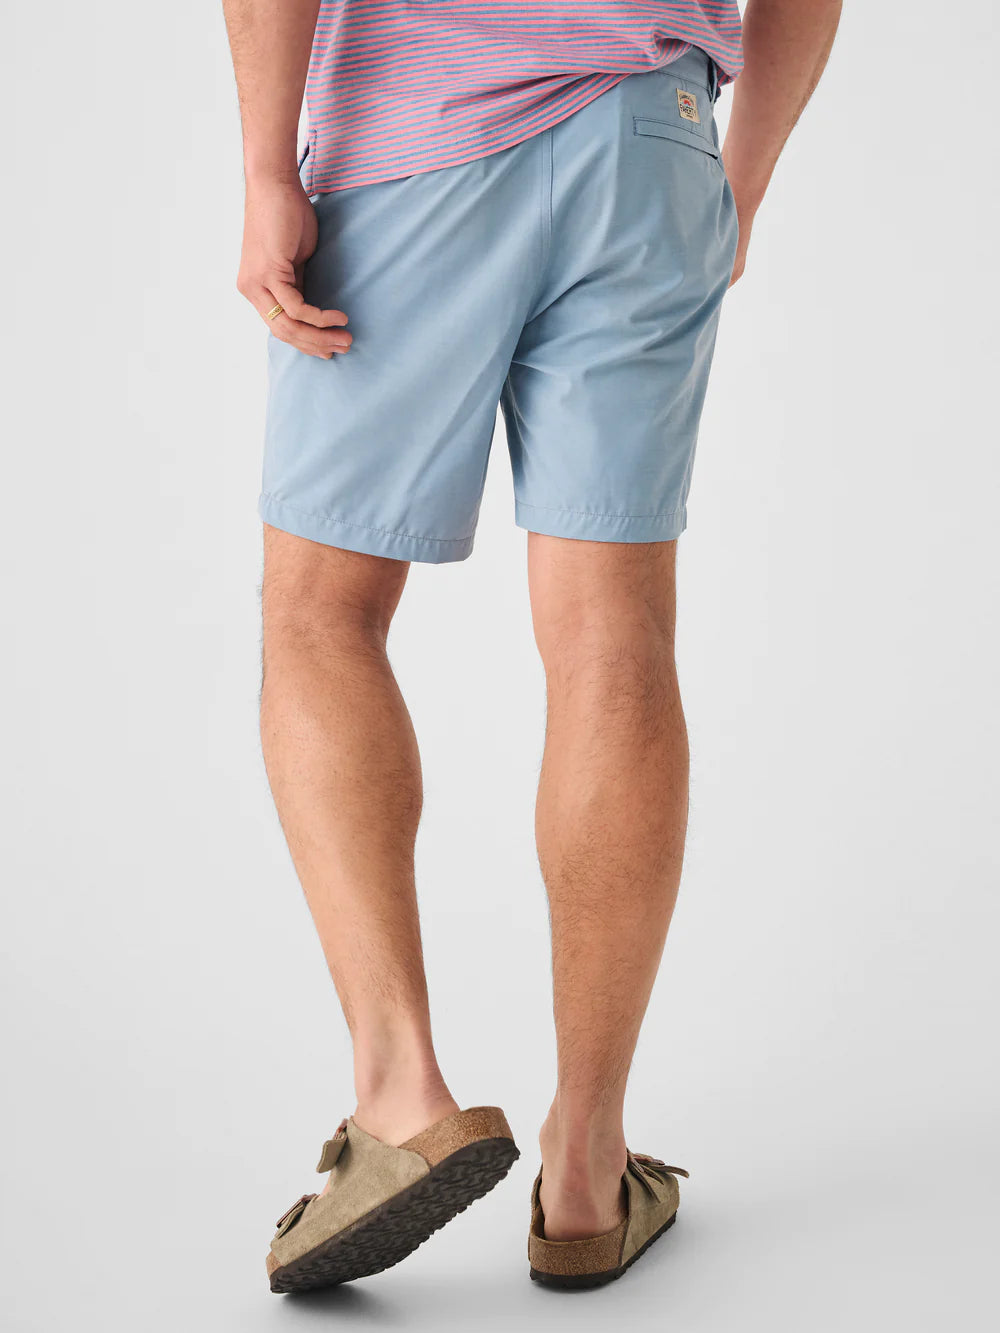 All Day Shorts (7” inseam)